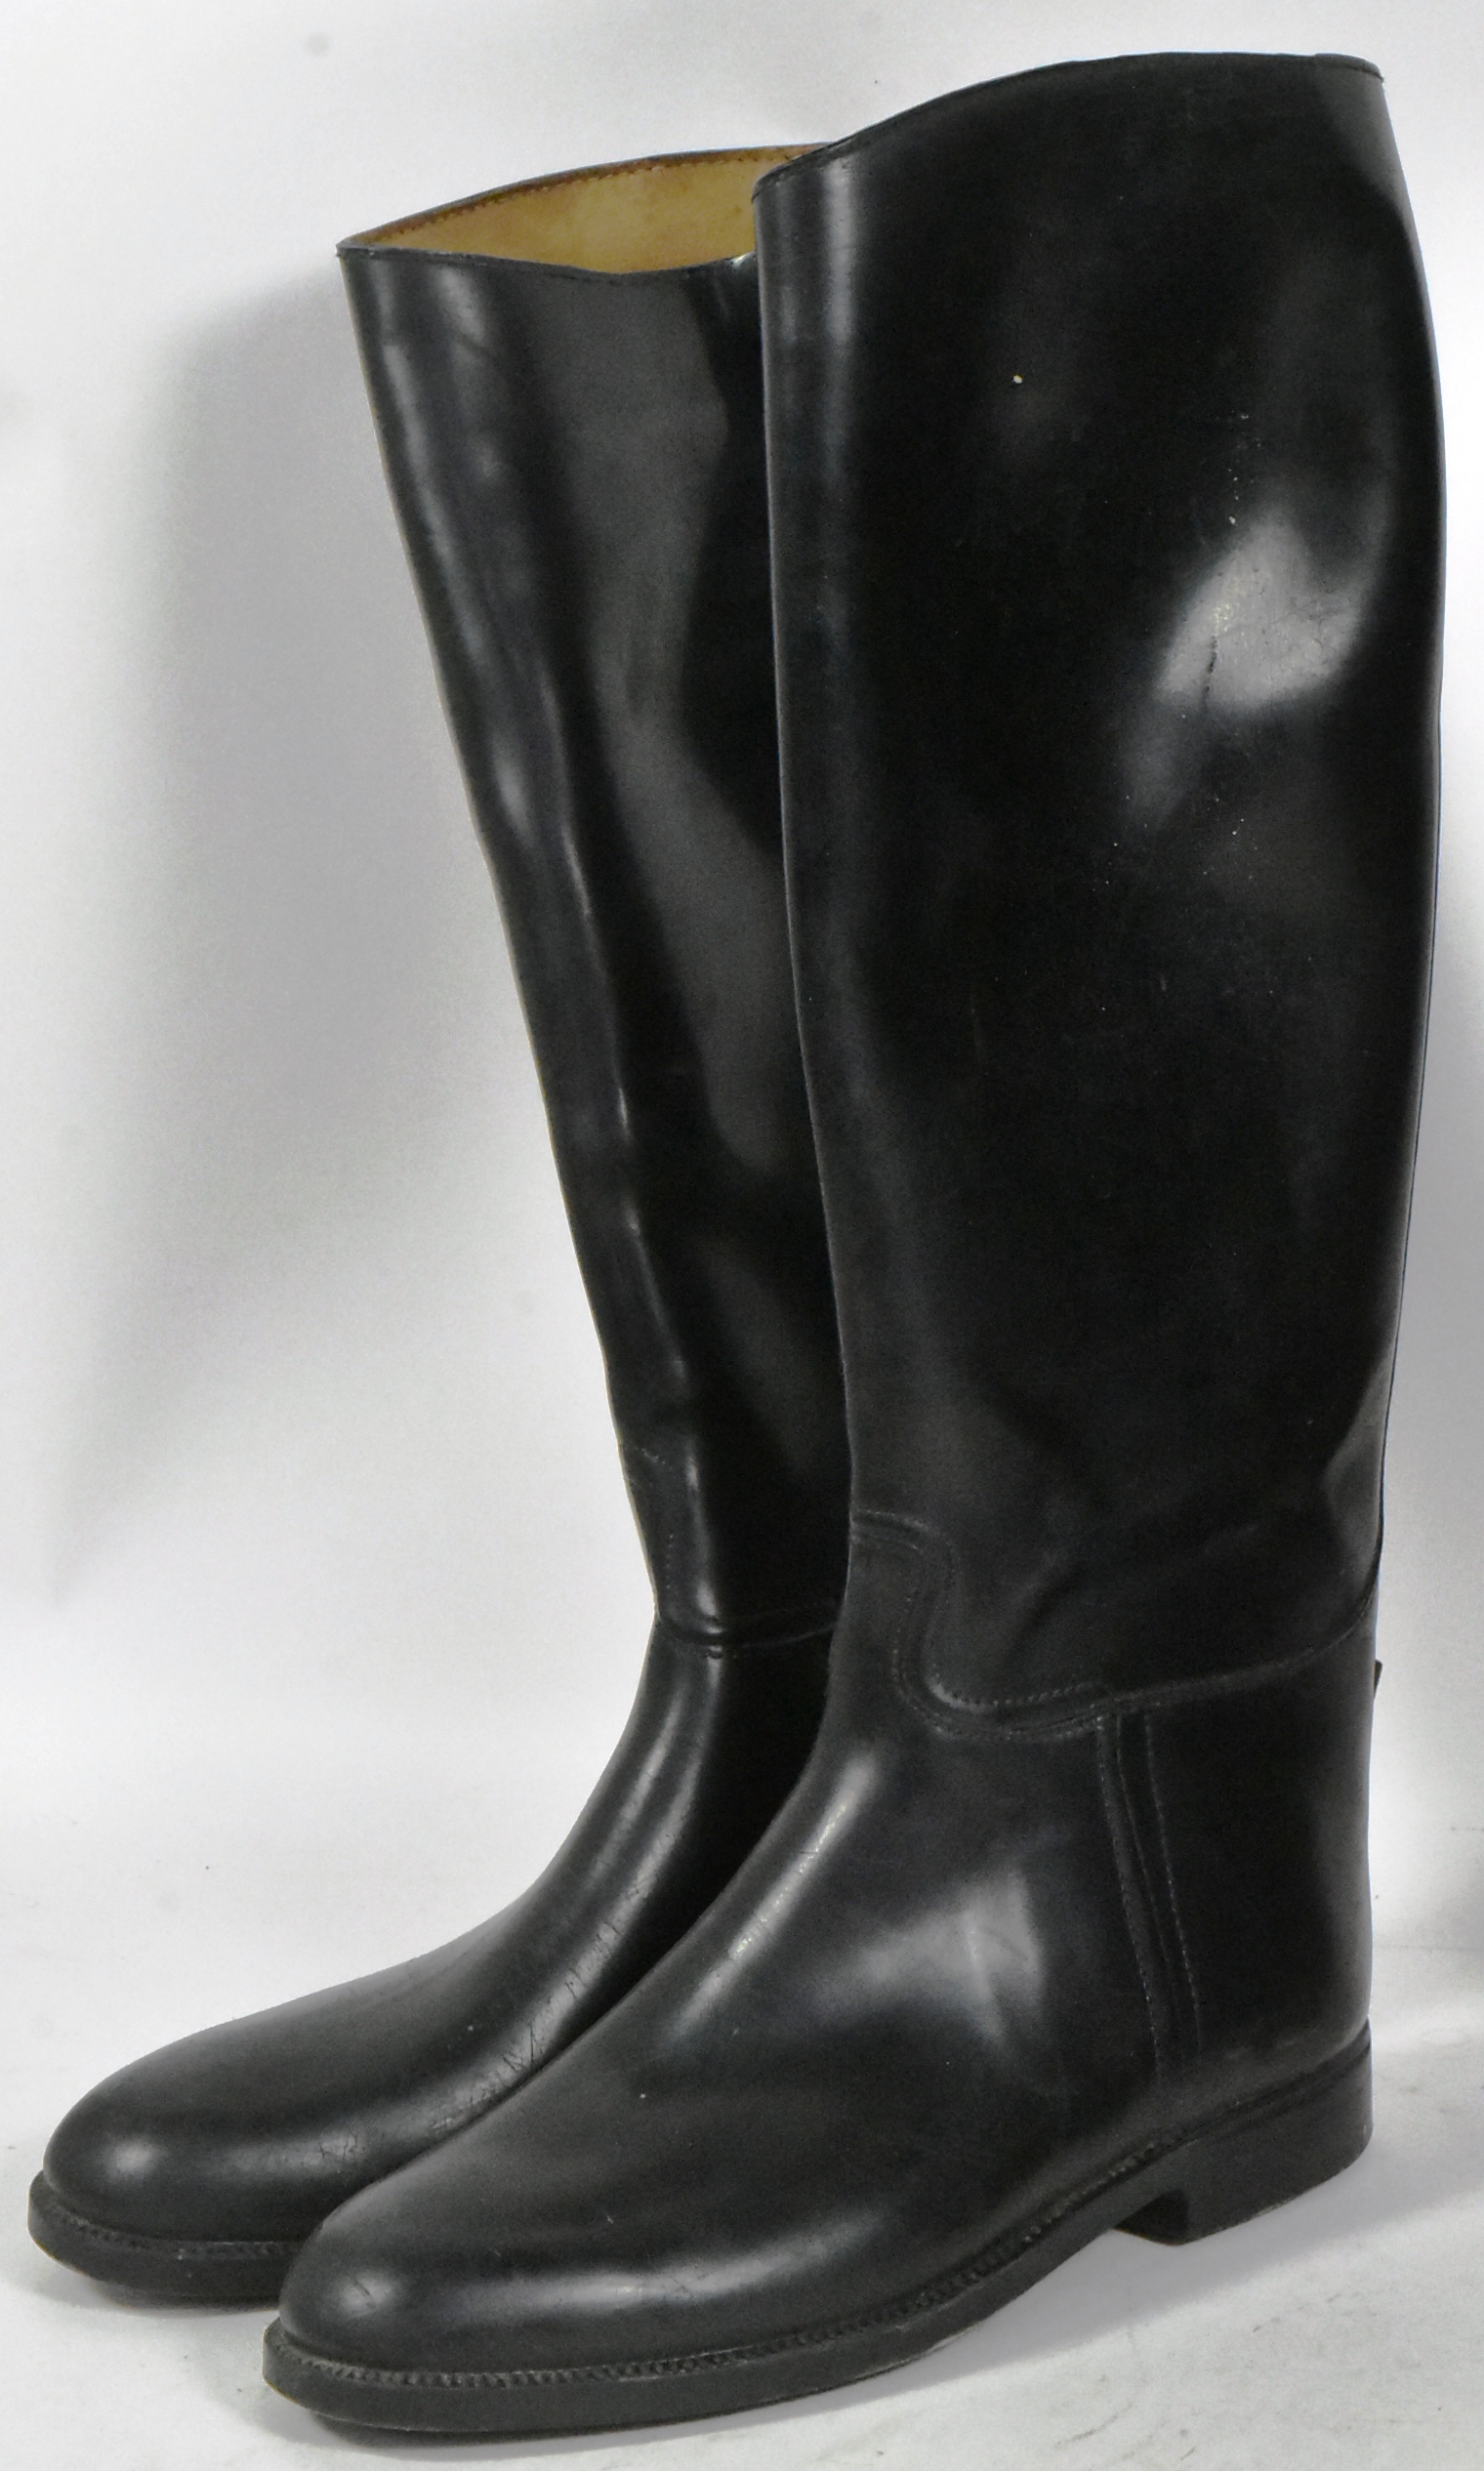 TWO PAIRS OF LADIES HORSE RIDING BOOTS - SIZE UK 7 - Image 3 of 5